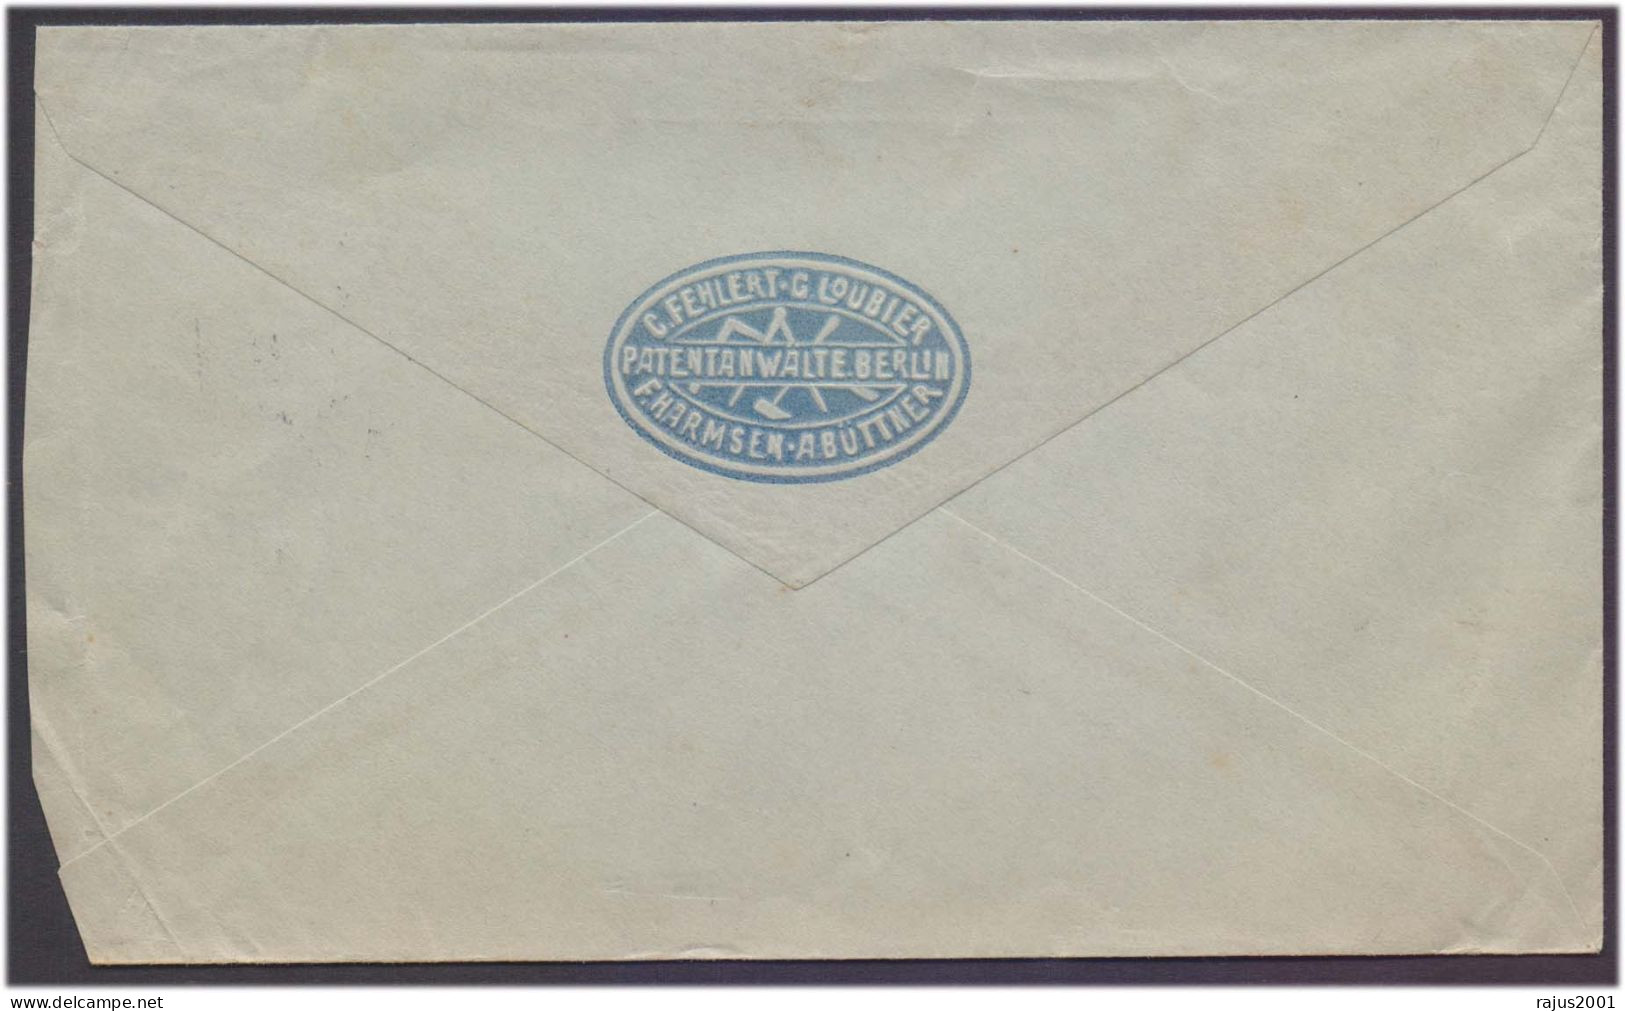 Deutsches Reich Berlin 1906, Received Cyrus Kehr  Germany Postal Stationery Cover - Covers